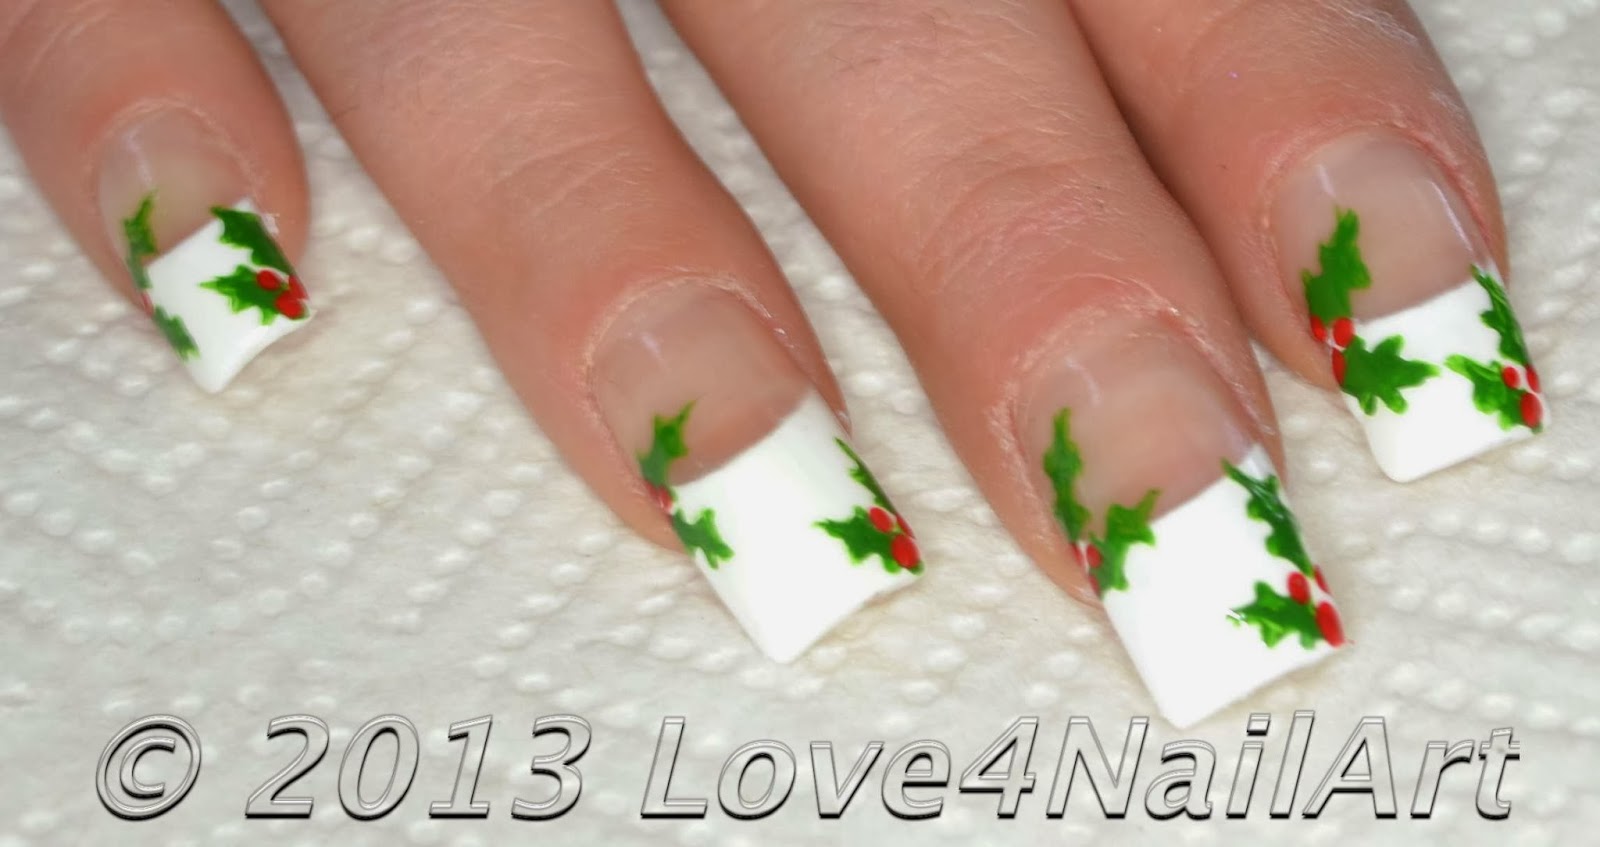 1. Christmas Holly Nail Art Designs - wide 8